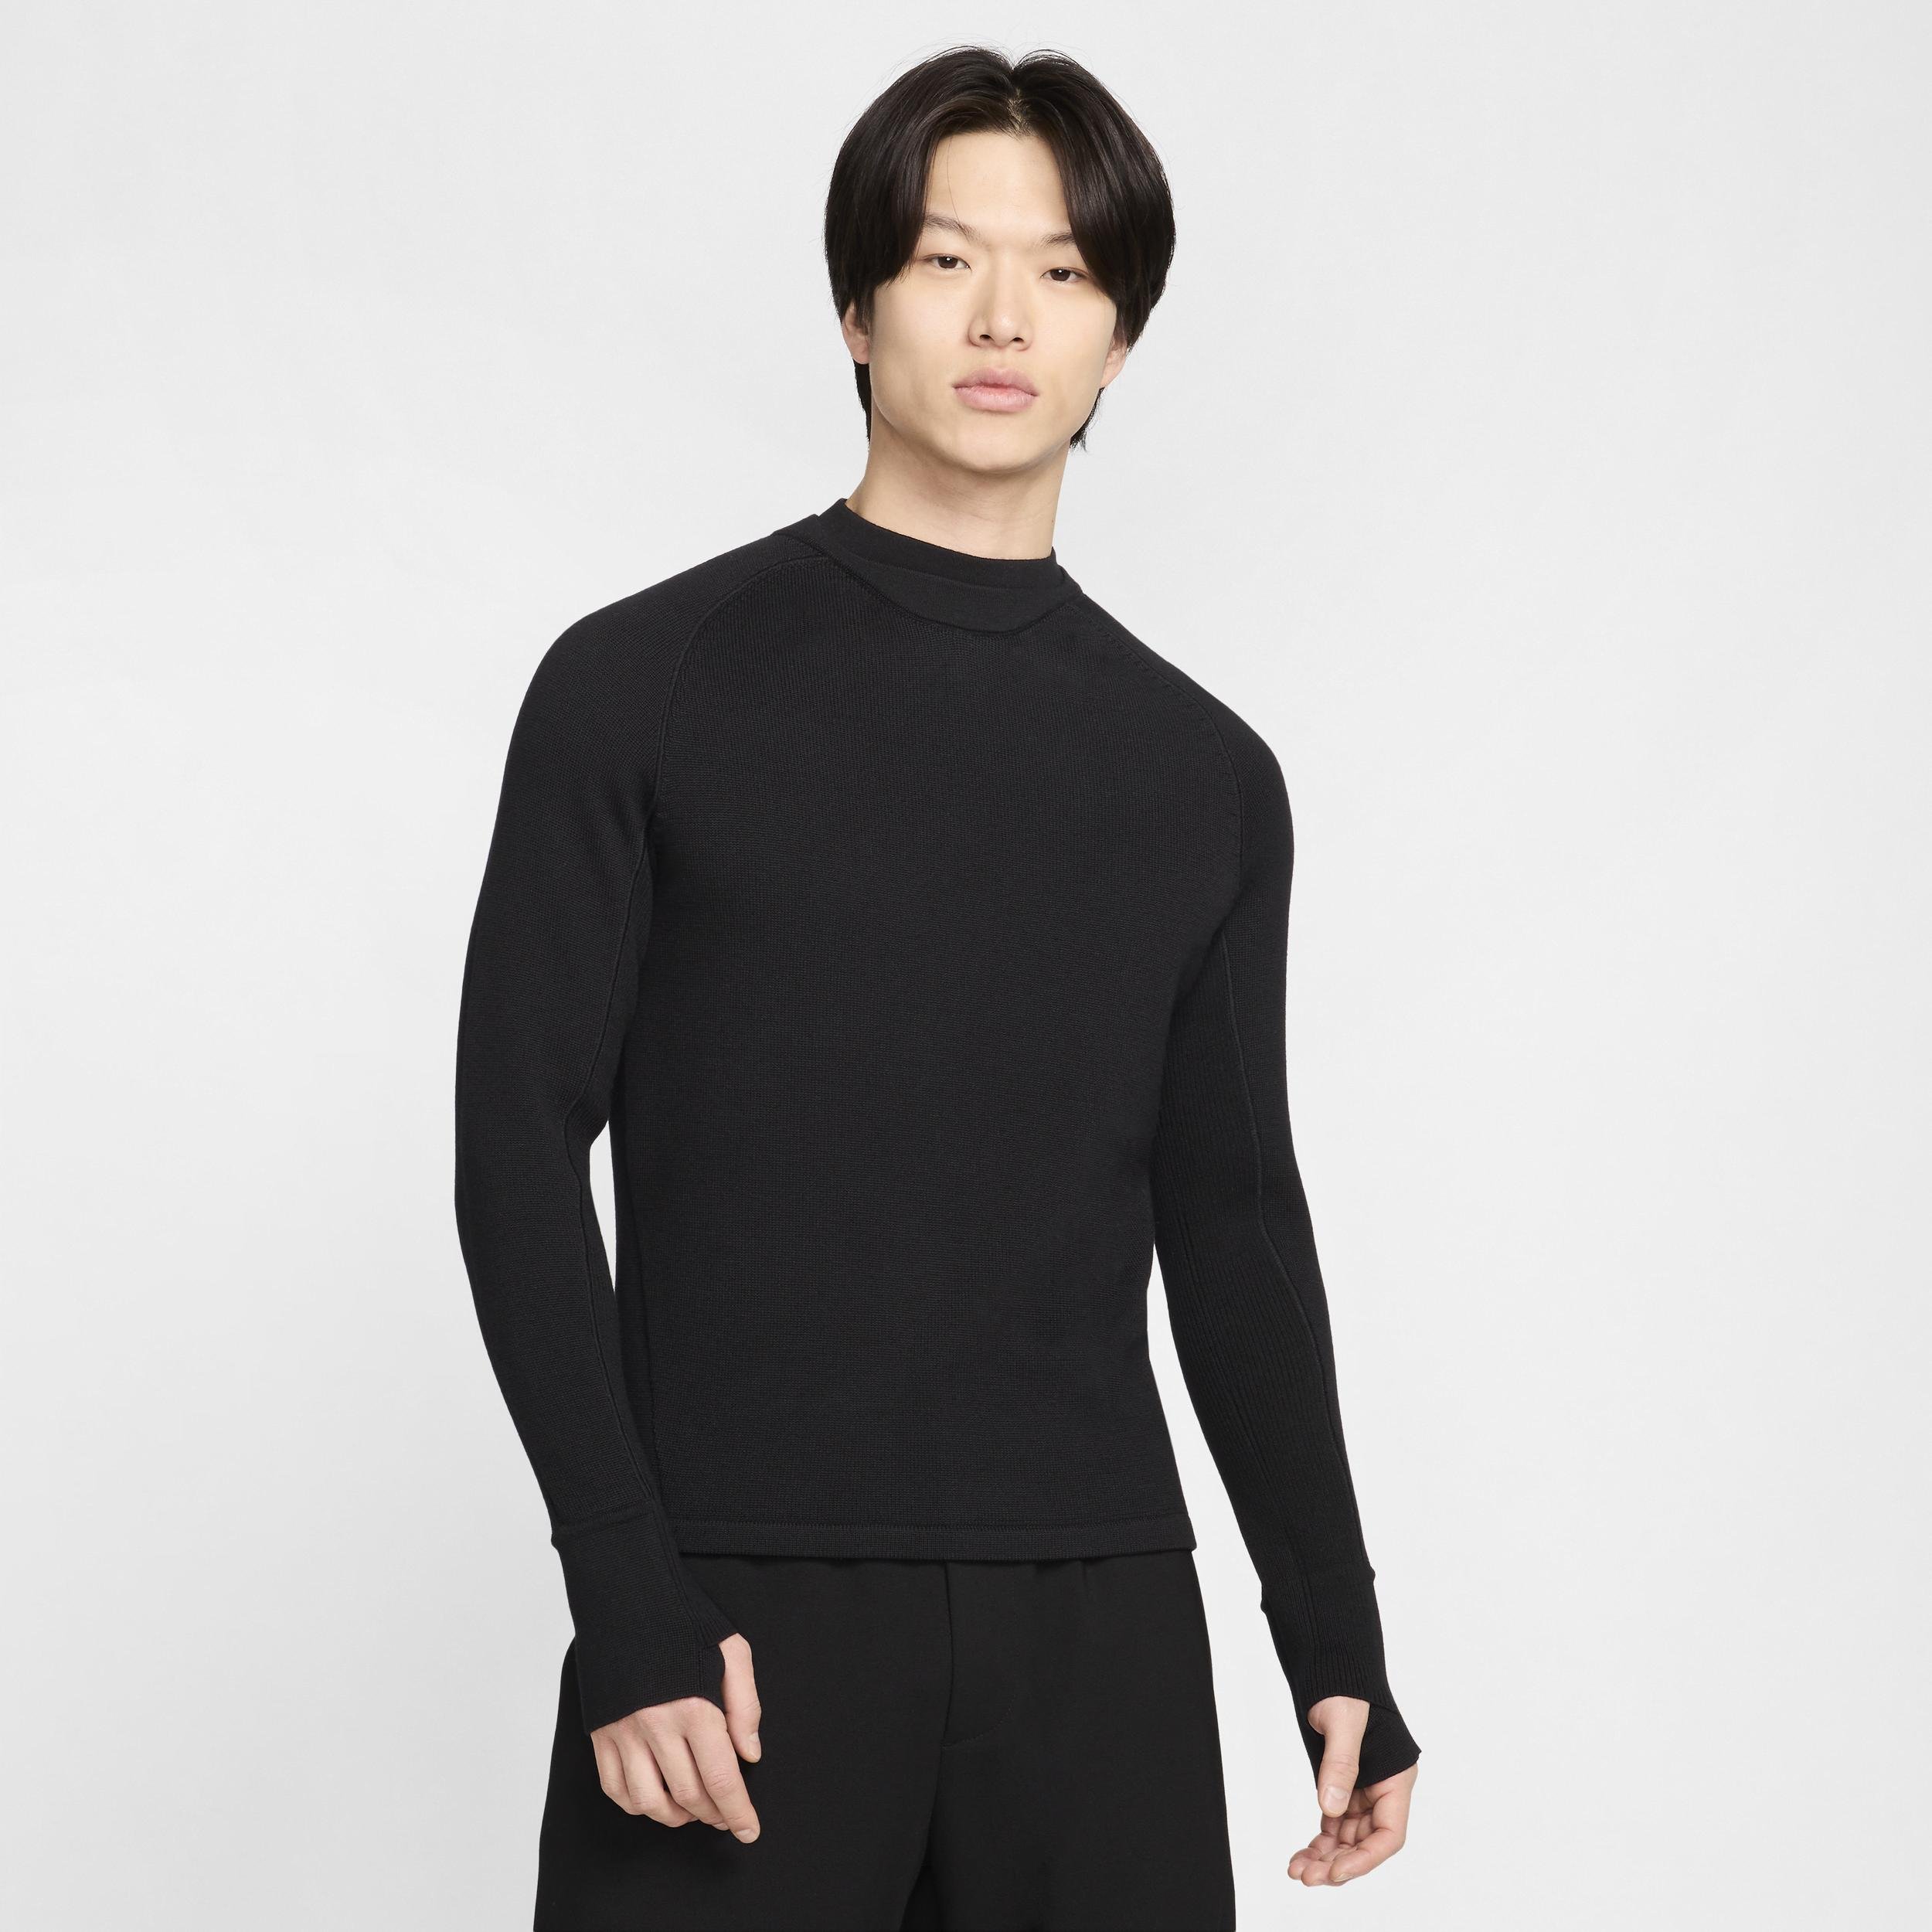 Nike Men's Every Stitch Considered Long-Sleeve Computational Knit Top by NIKE